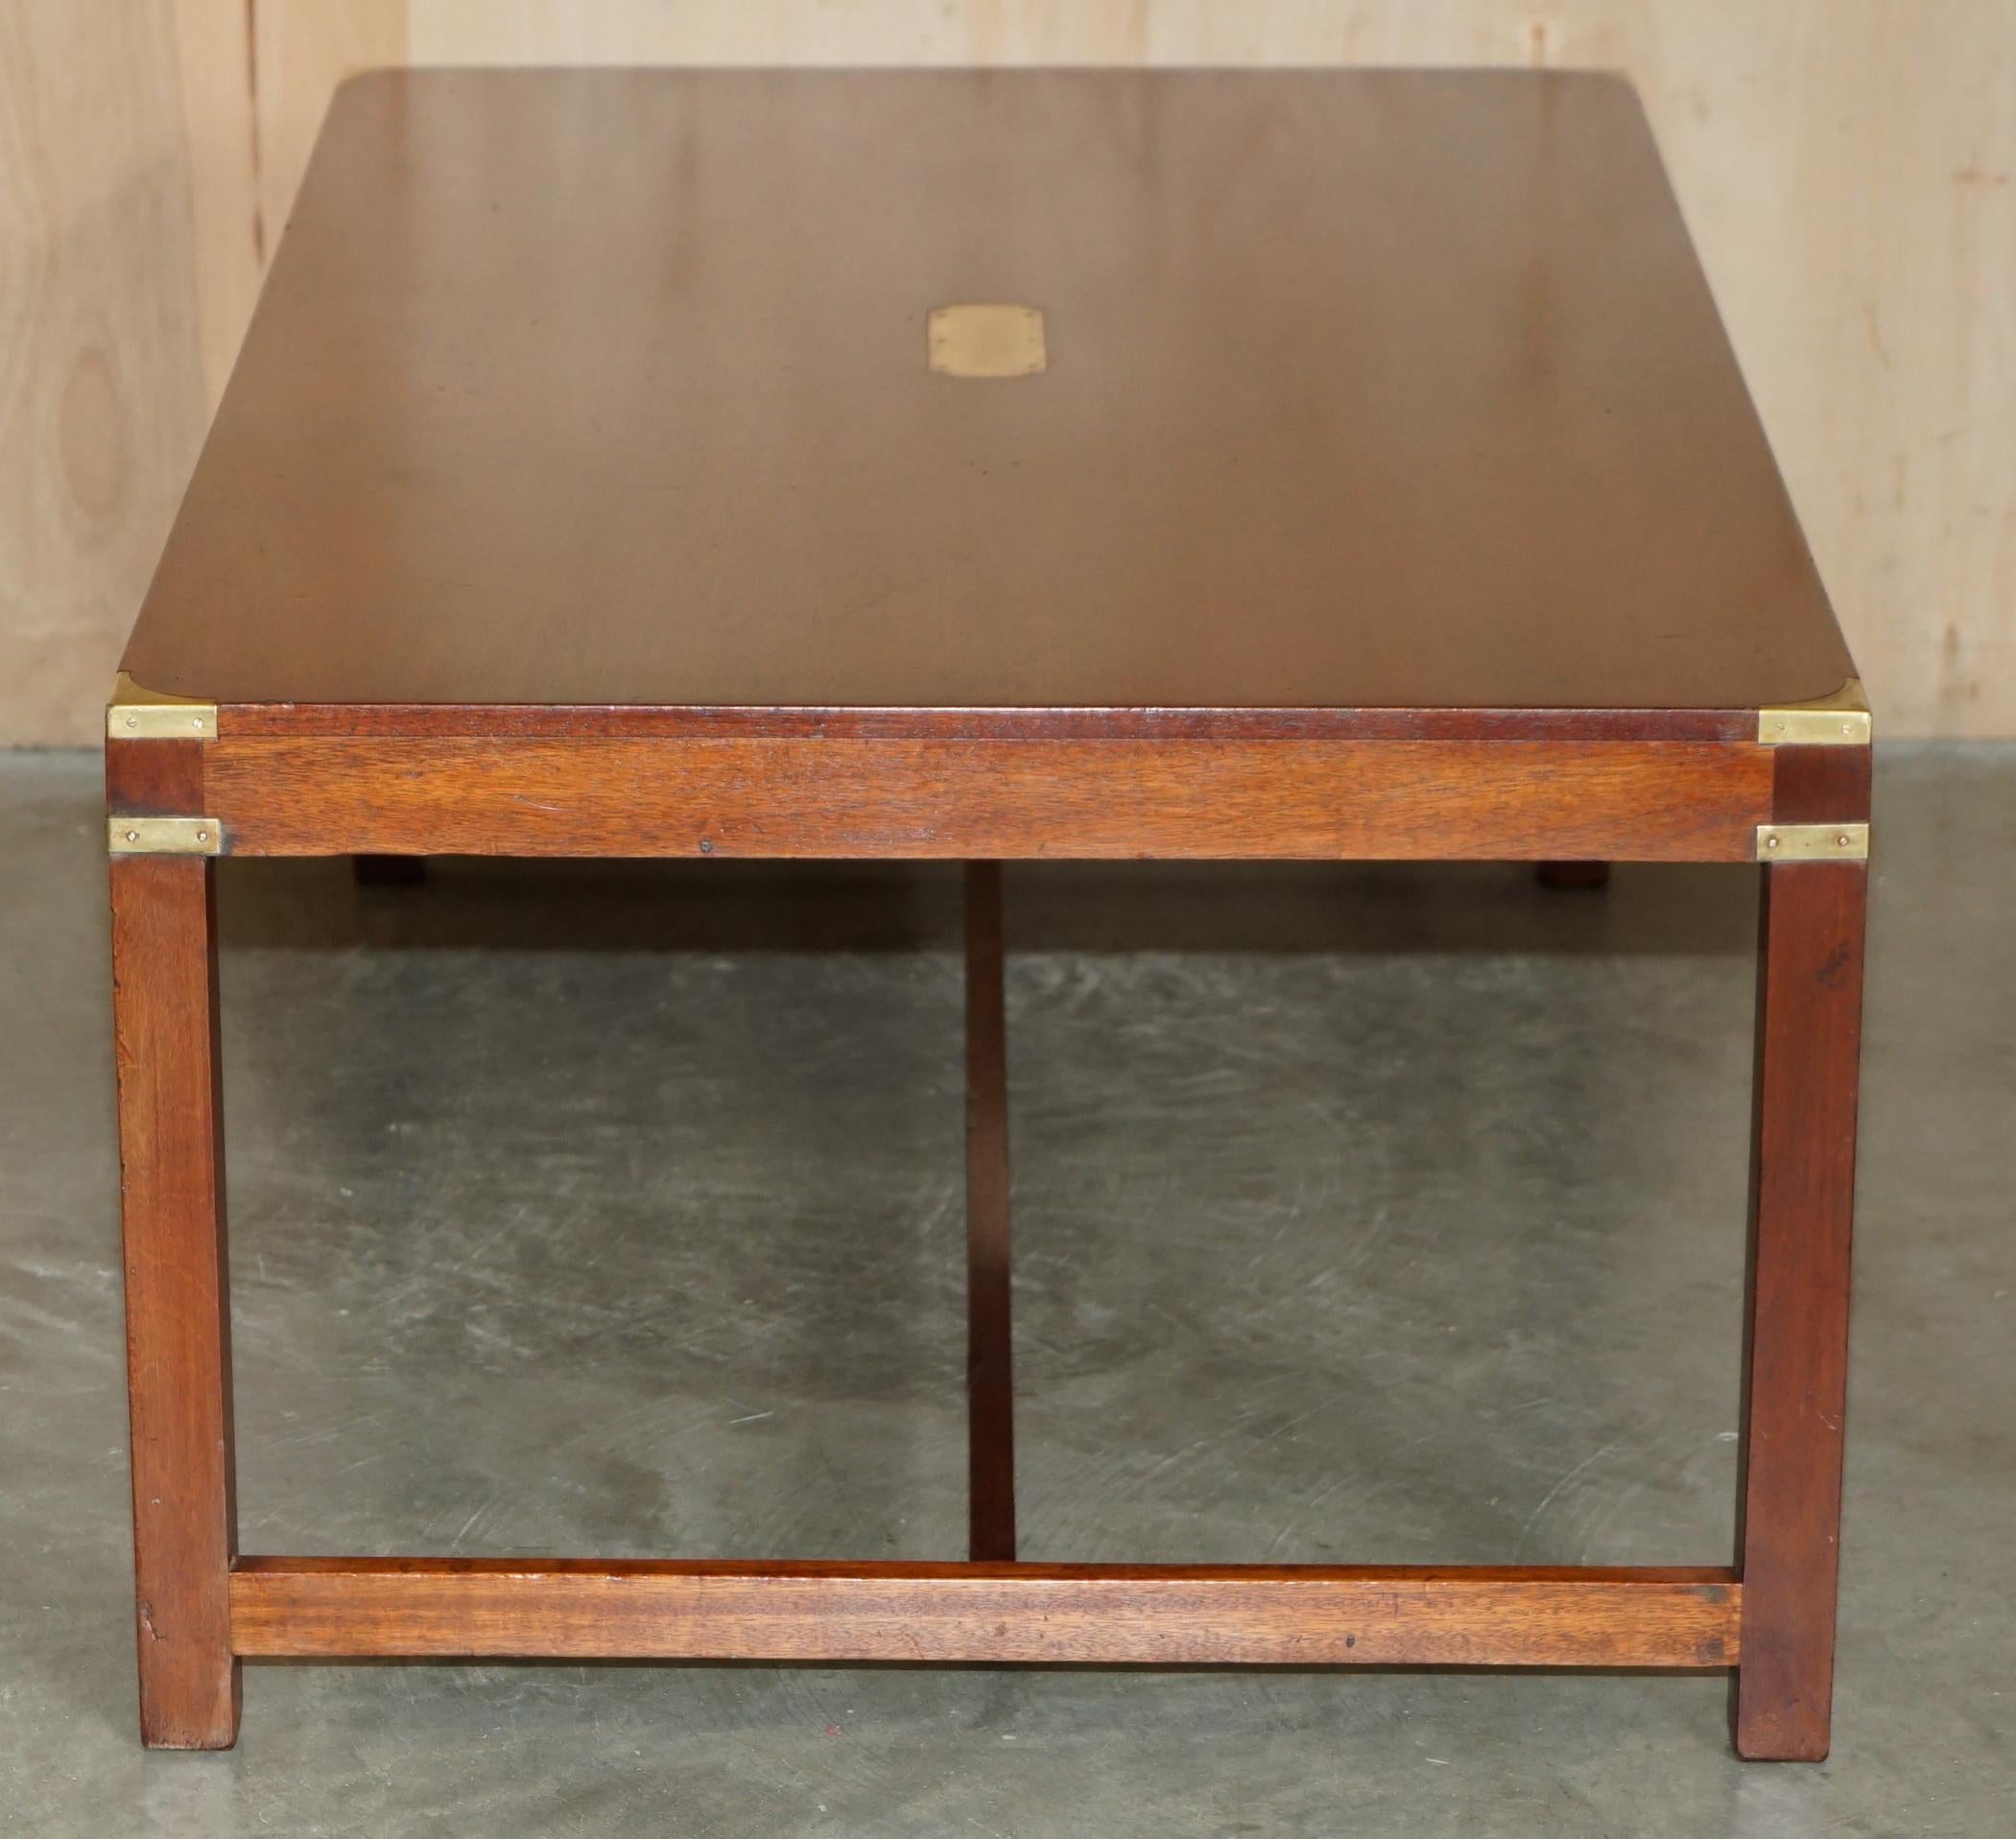 FULLY RESTORED FRENCH POLISHED HARRODS KENNEDY MiLITARY CAMPAIGN COFFEE TABLE For Sale 3